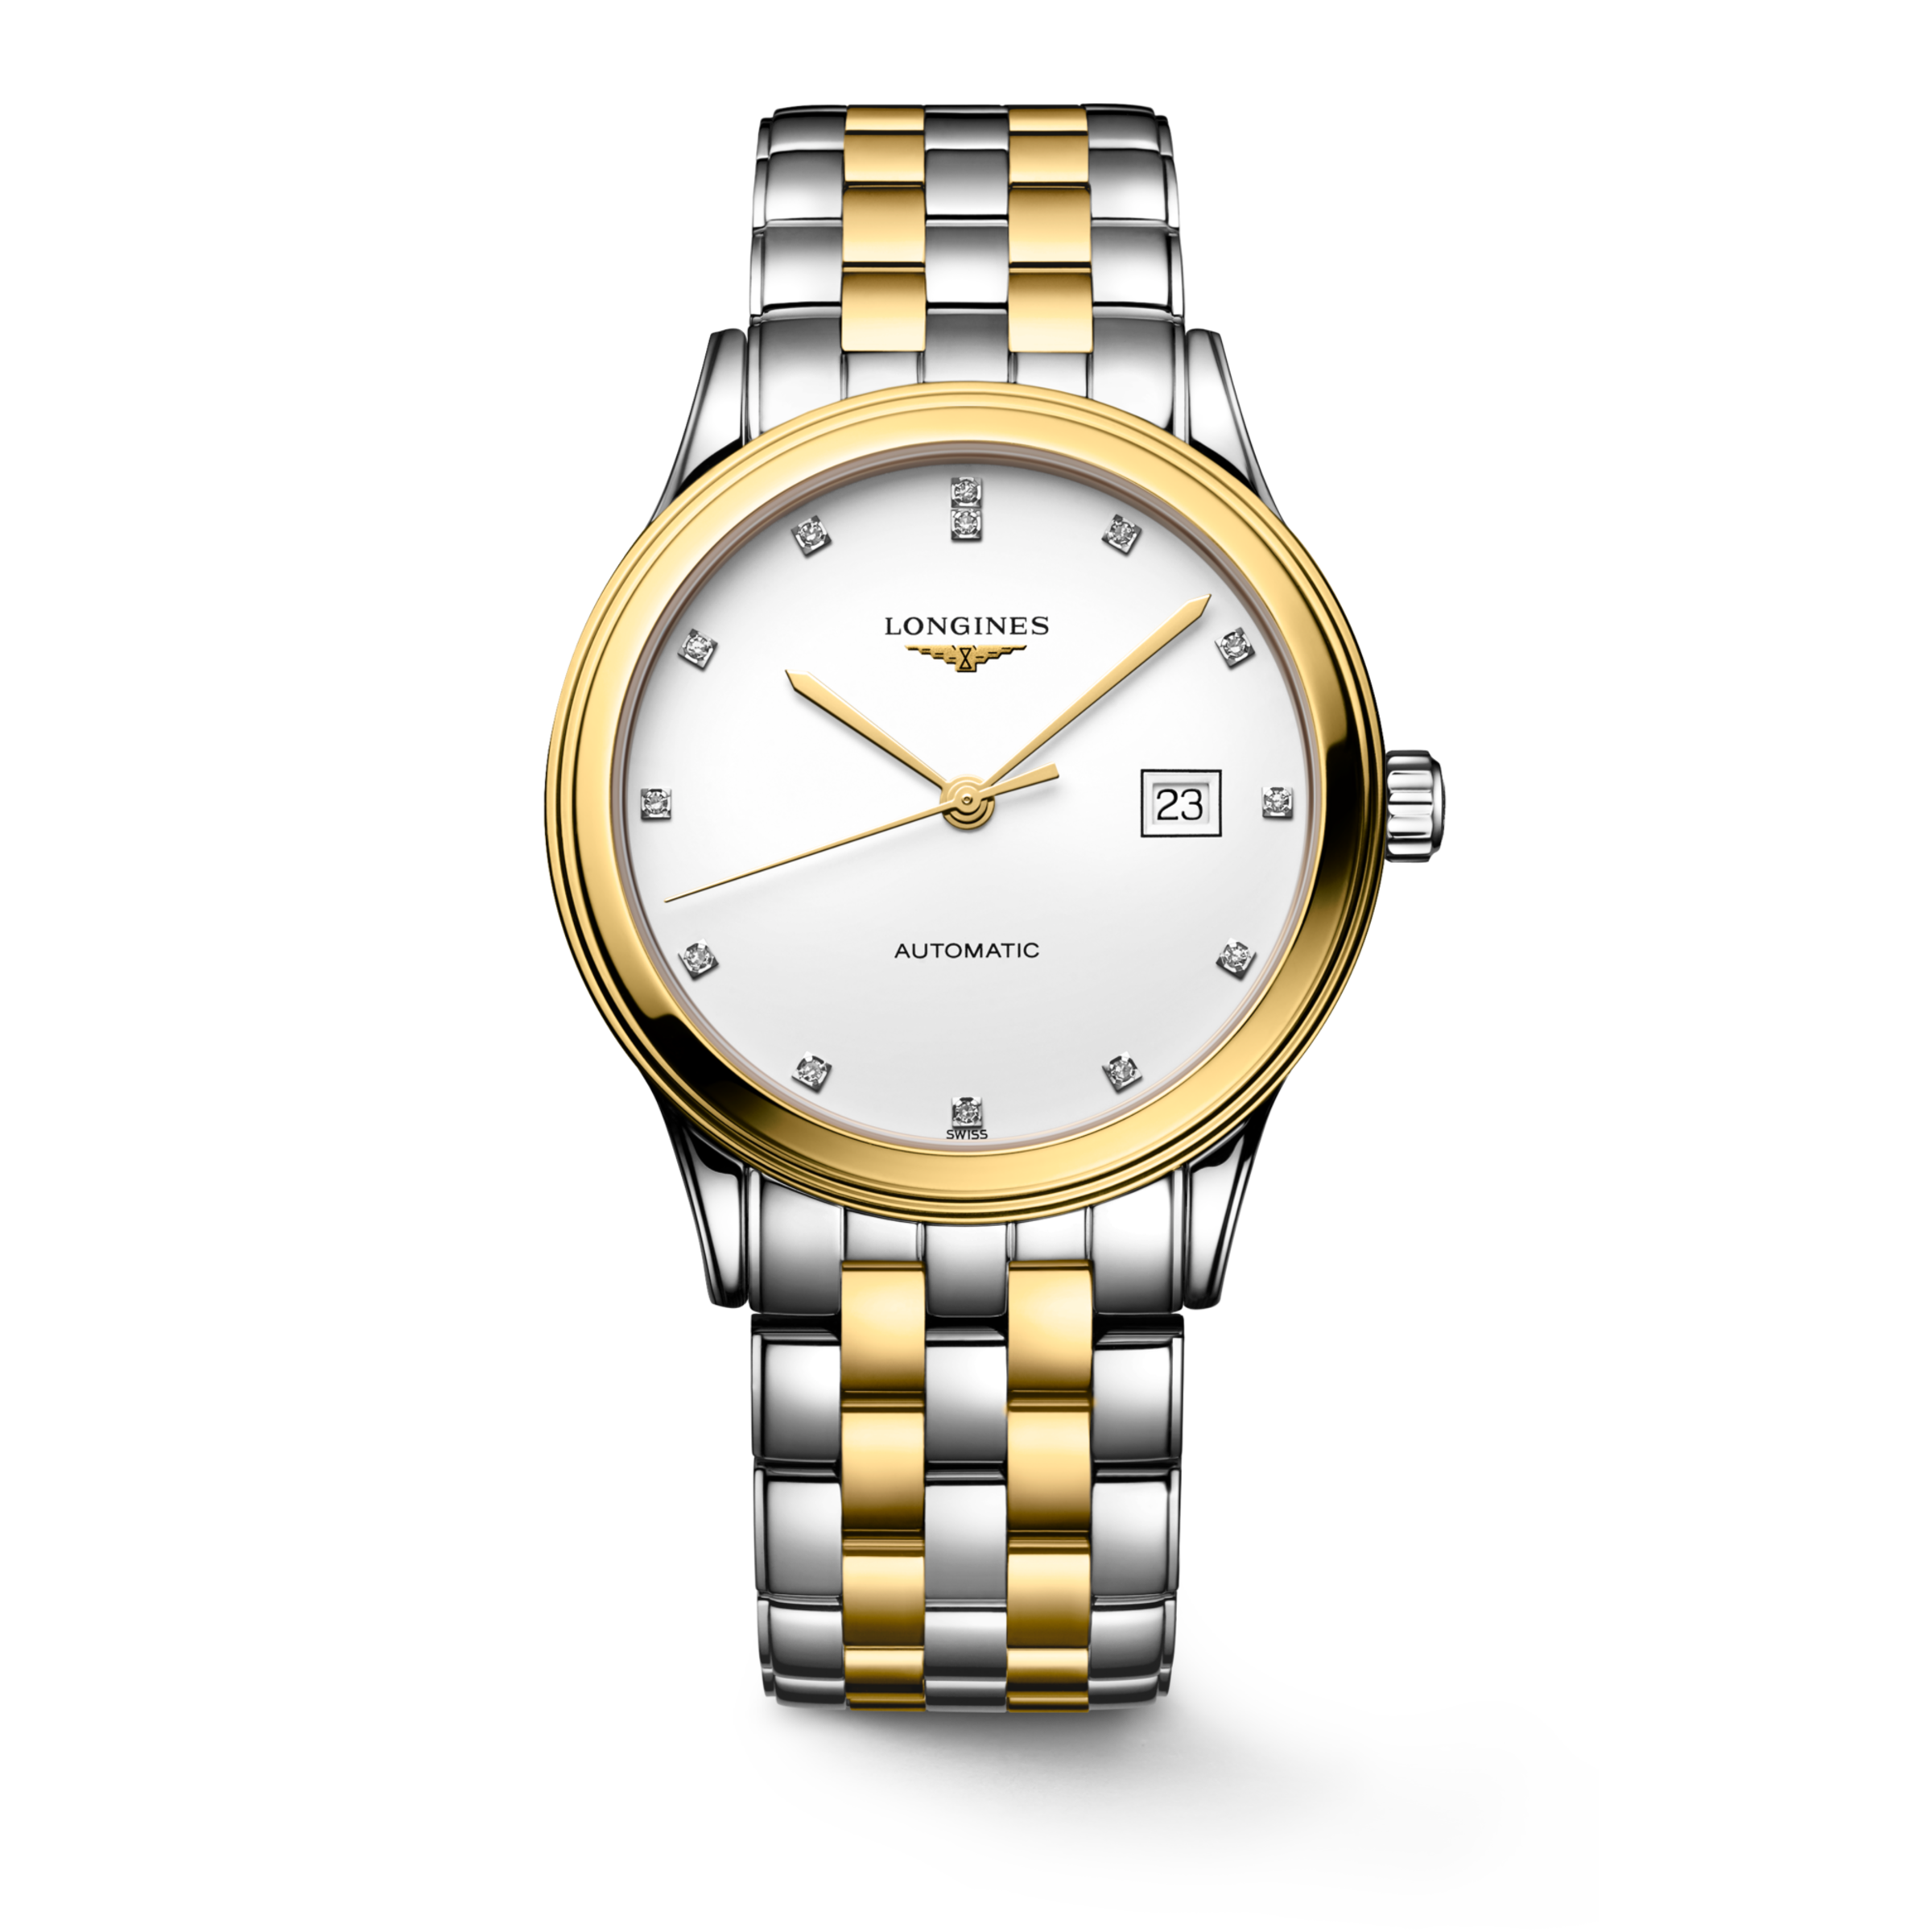 Longines FLAGSHIP Automatic Stainless steel and yellow PVD coating Watch - L4.984.3.27.7